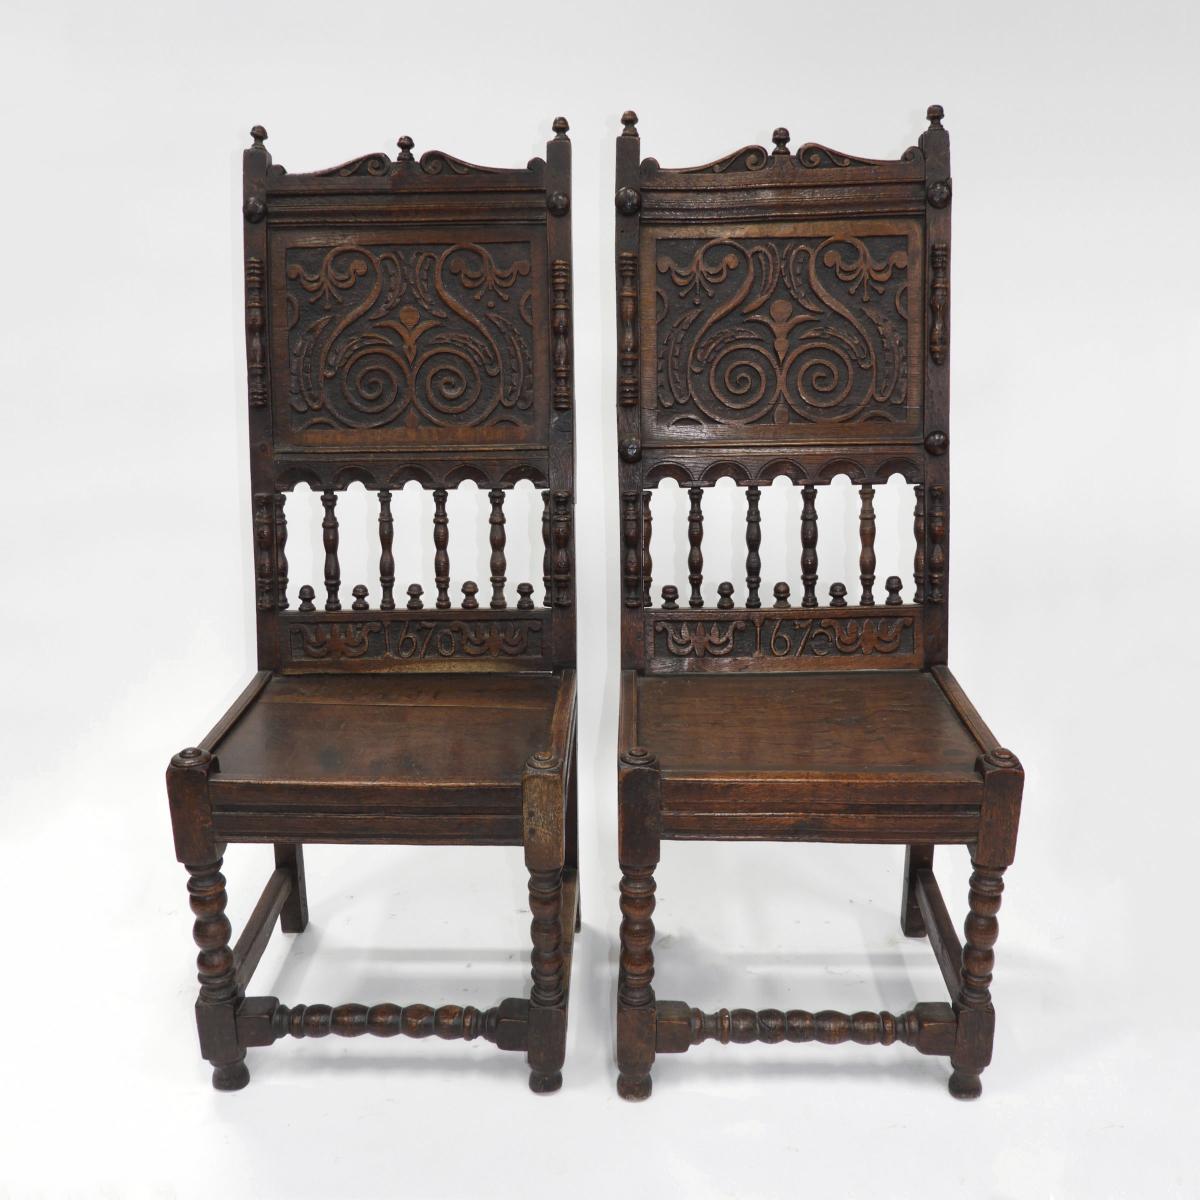 Pair of English Oak Joined Backstools, 1670, height 47 in — 119.4 cm (2 Pieces)